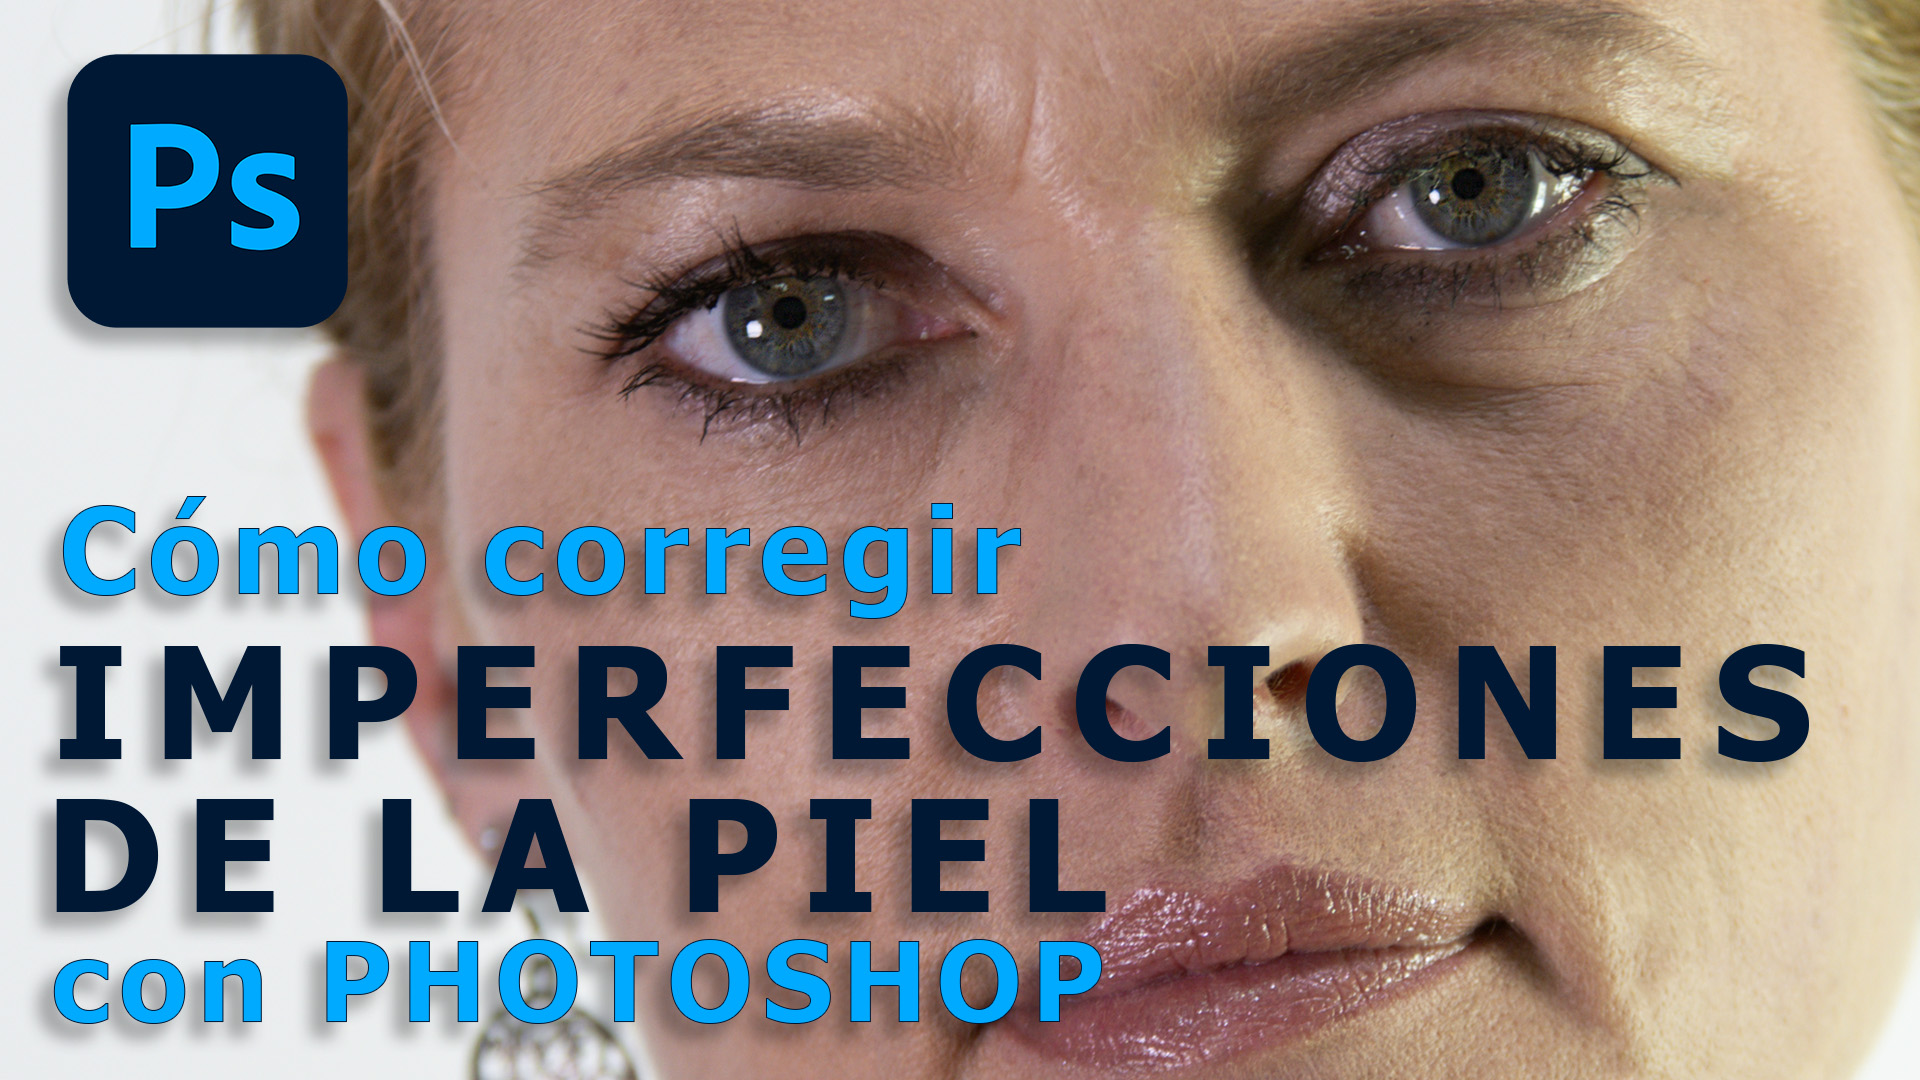 Learn to correct the imperfections of the skin of your models